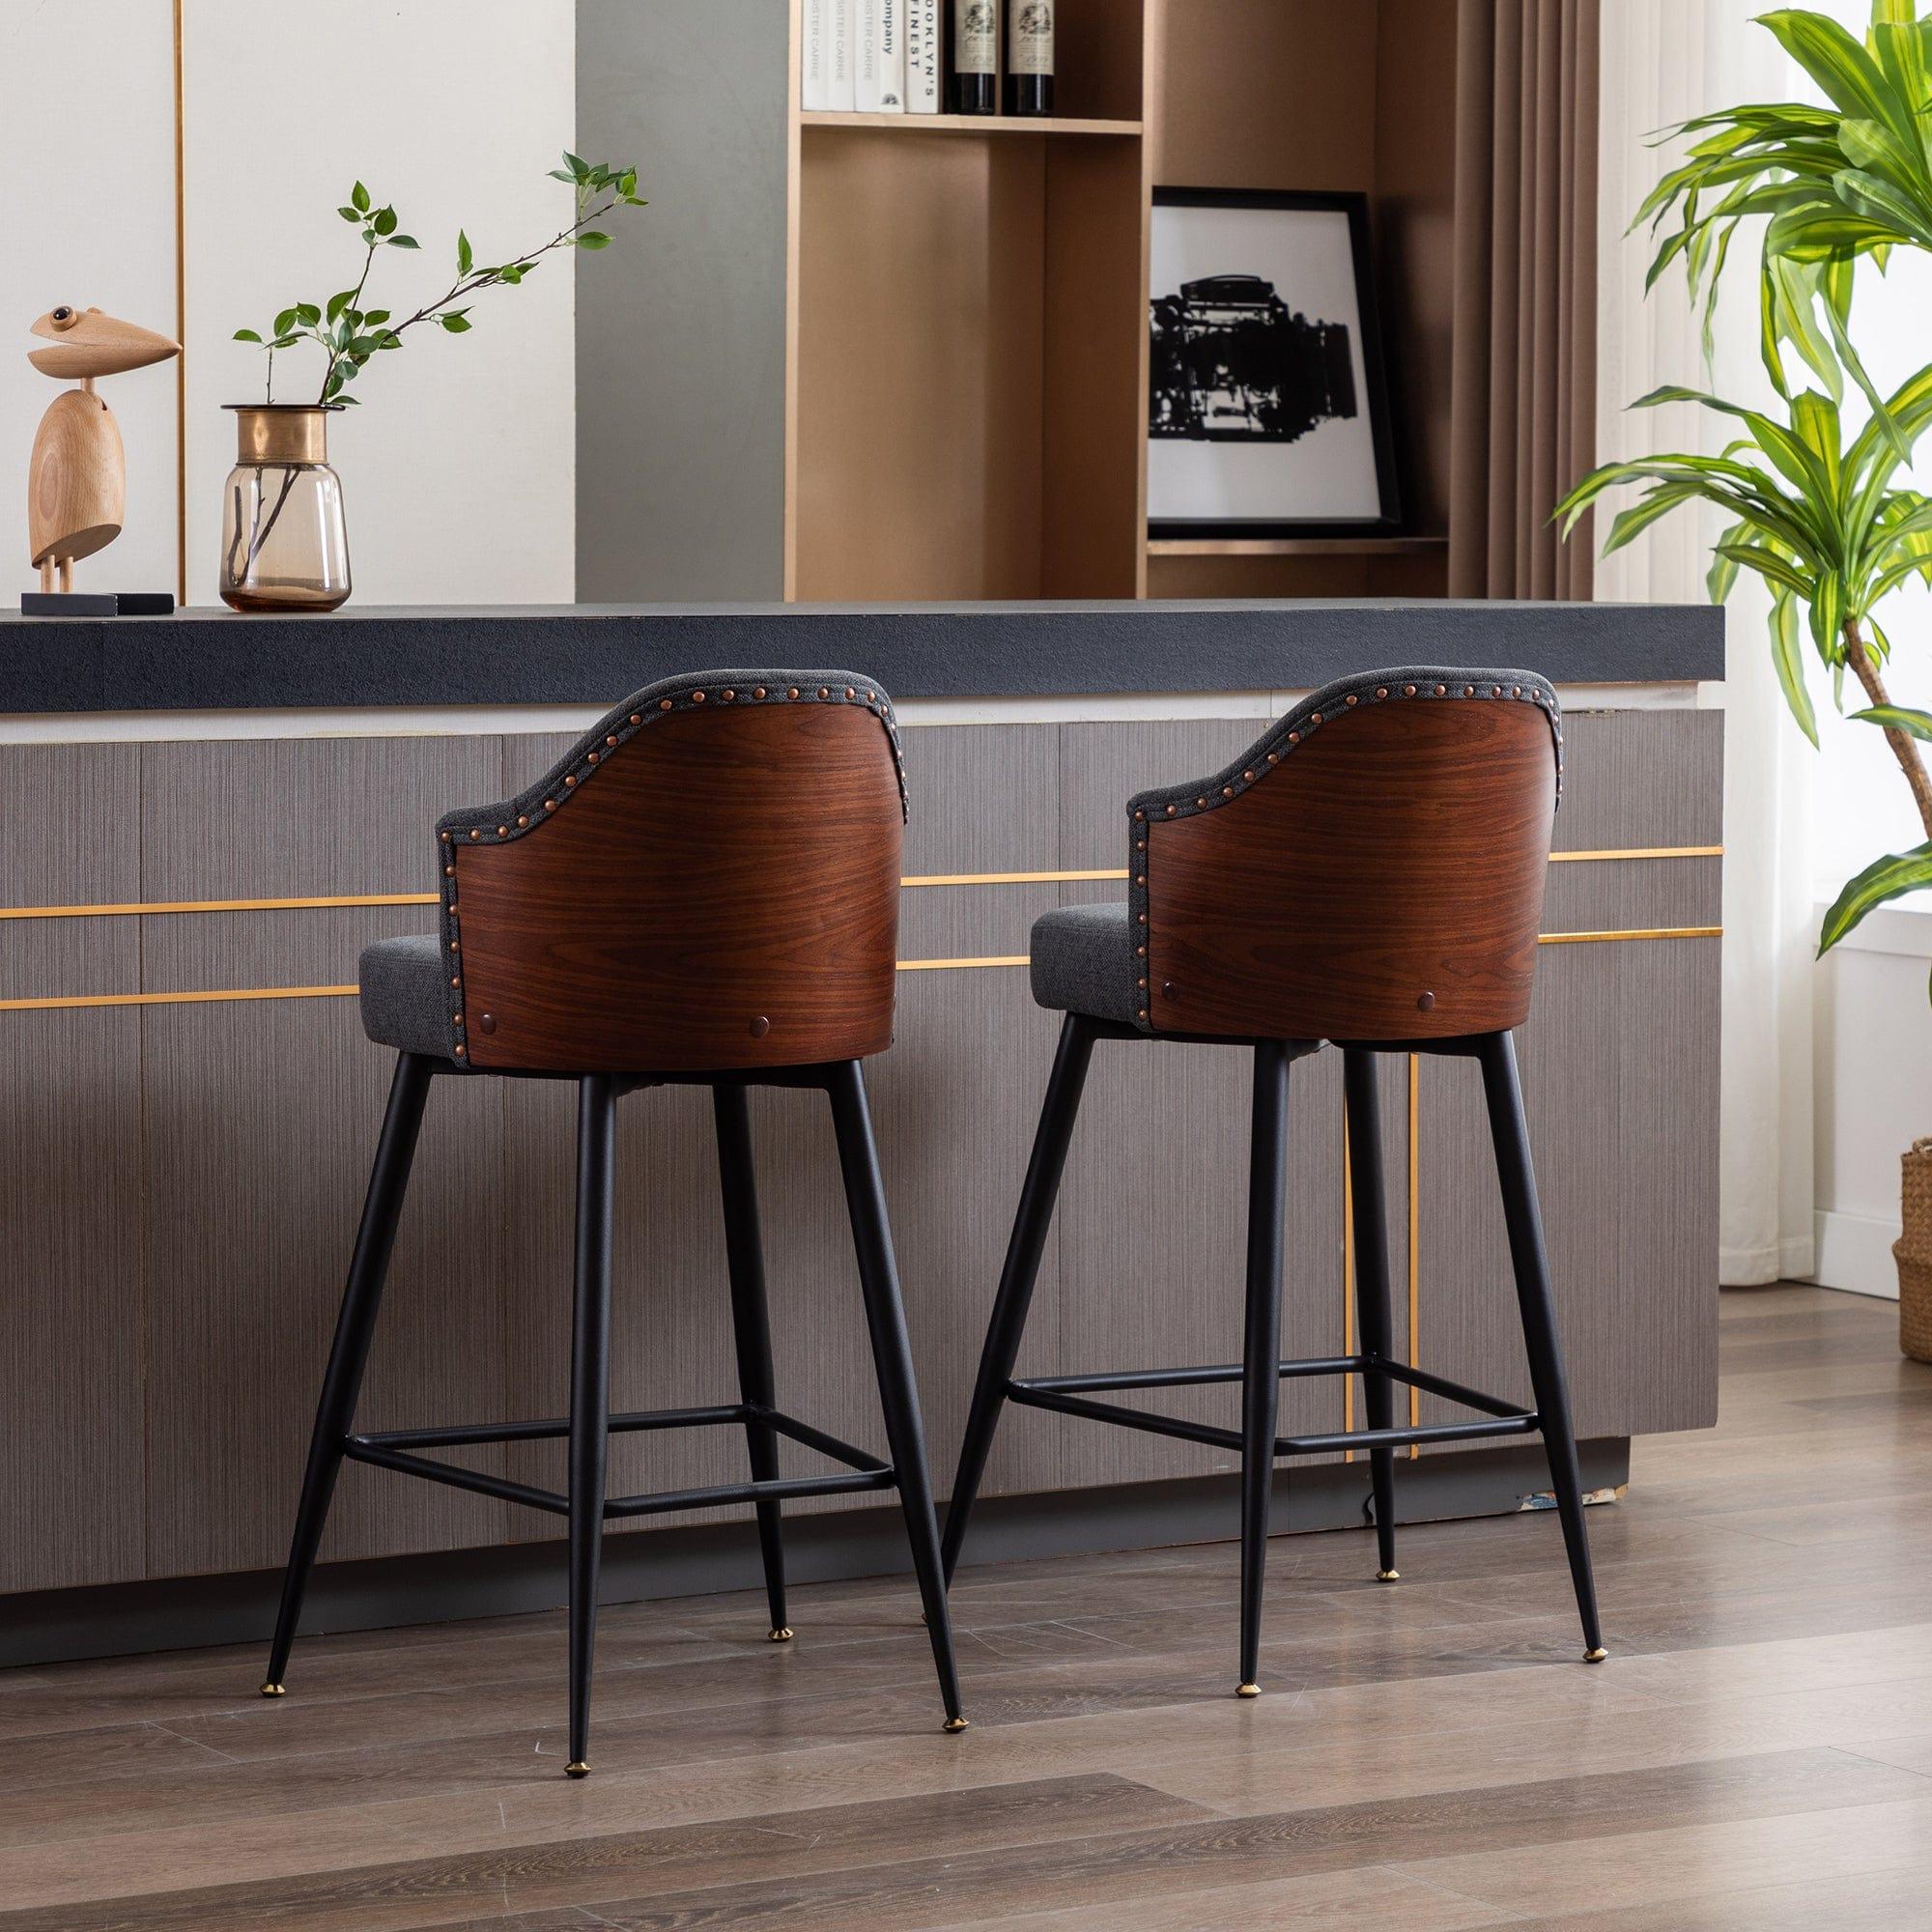 Shop Set of 2 Counter Bar Stools, Fabric Upholstered Bar Stool with Nailhead Trim Back, Metal Legs in Matte Black, 25.59" H Seat Height Mademoiselle Home Decor